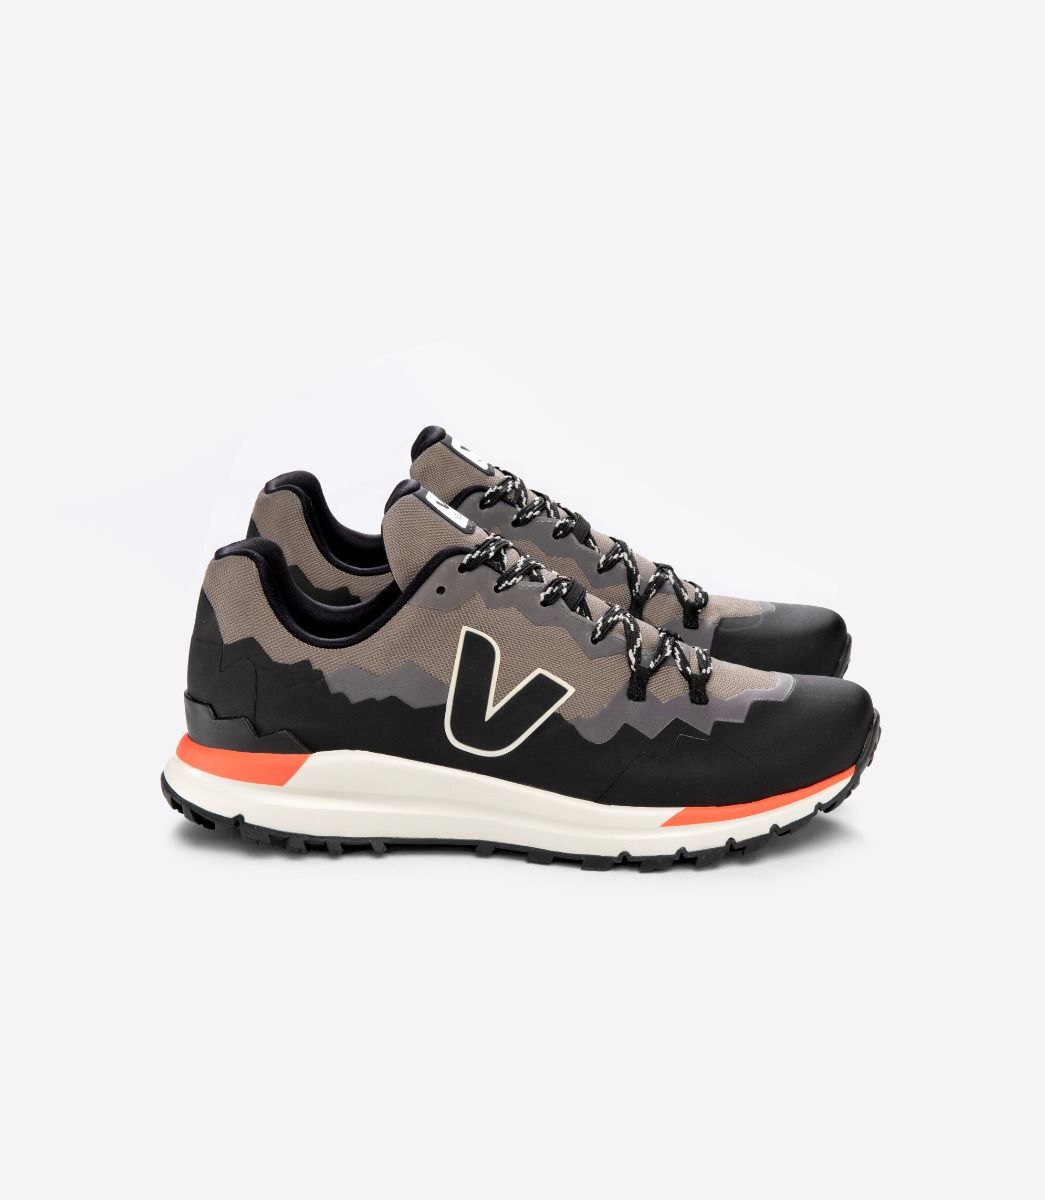 Lateral view of a pair of the Men's Fitz Roy Trek Shell by VEJA in the color Basalte/Black